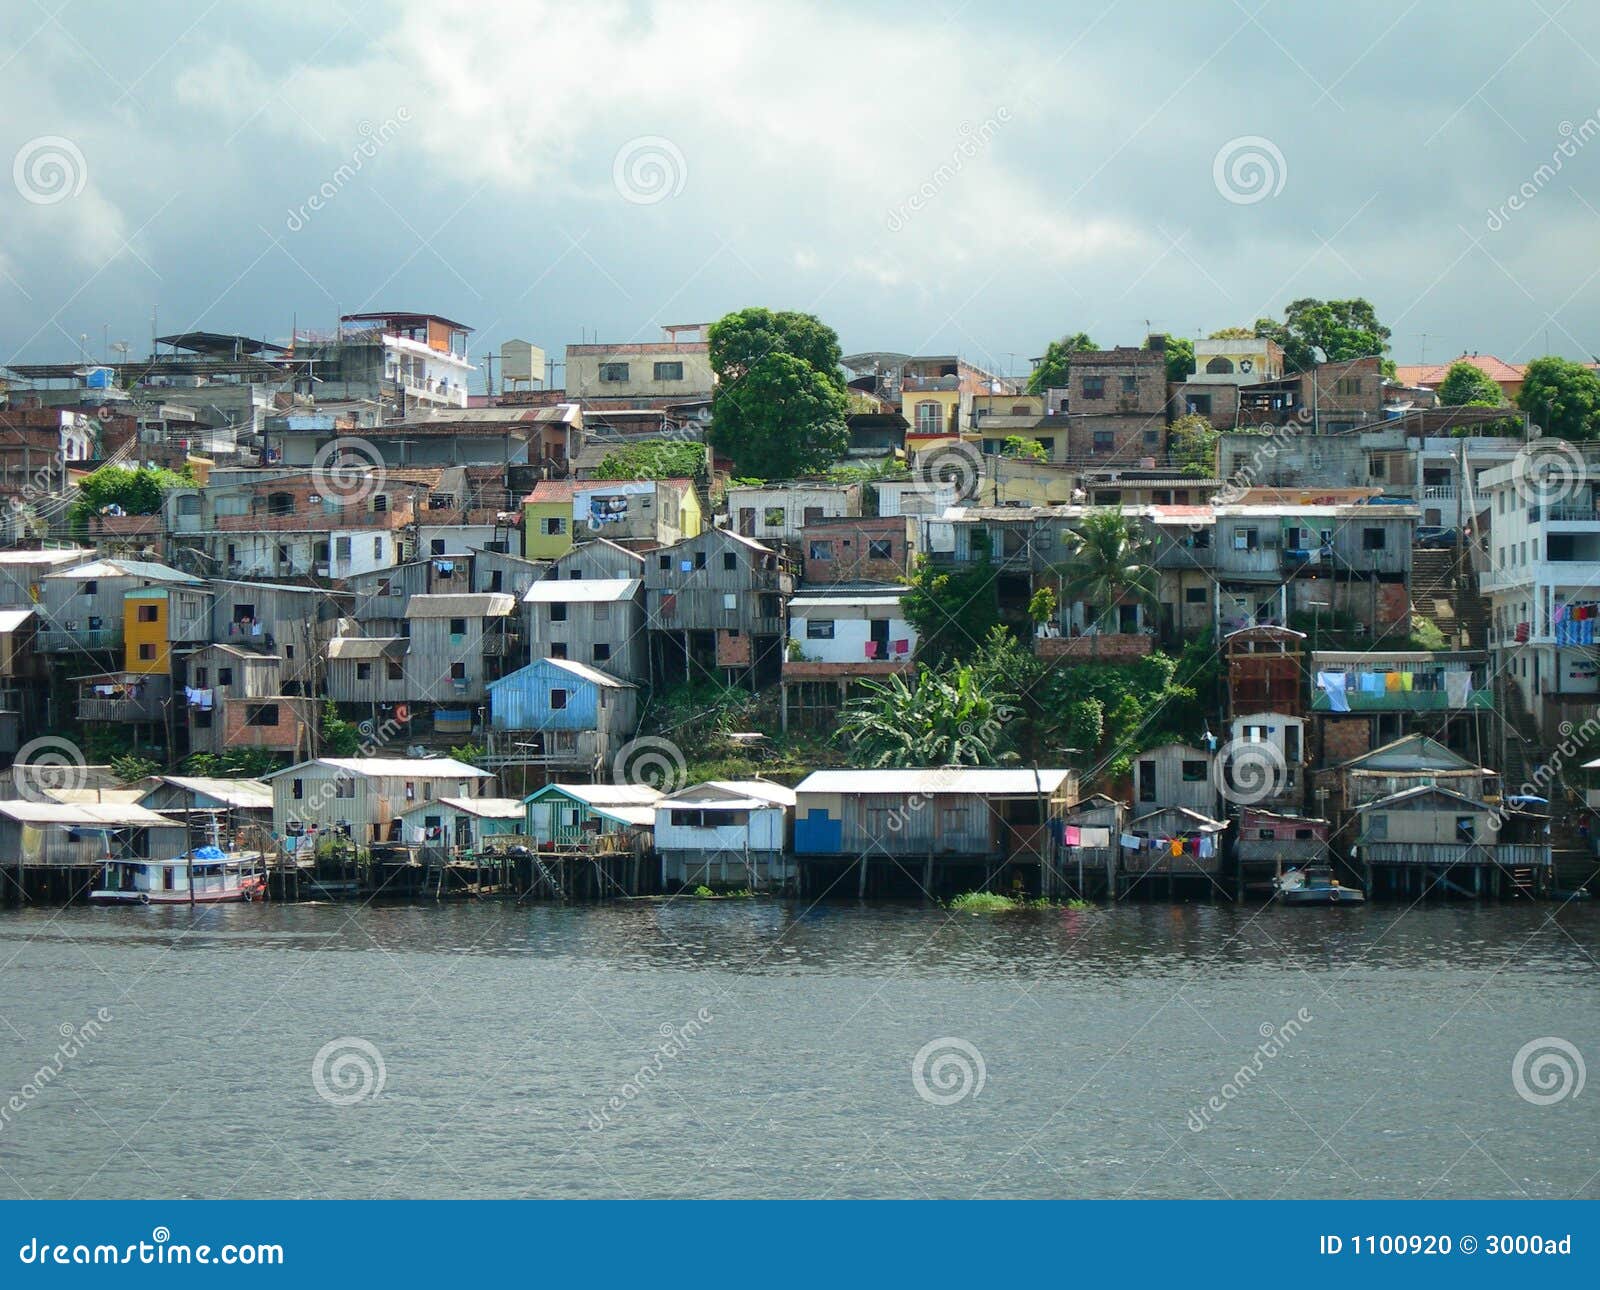 poverty on the amazon river in manaus